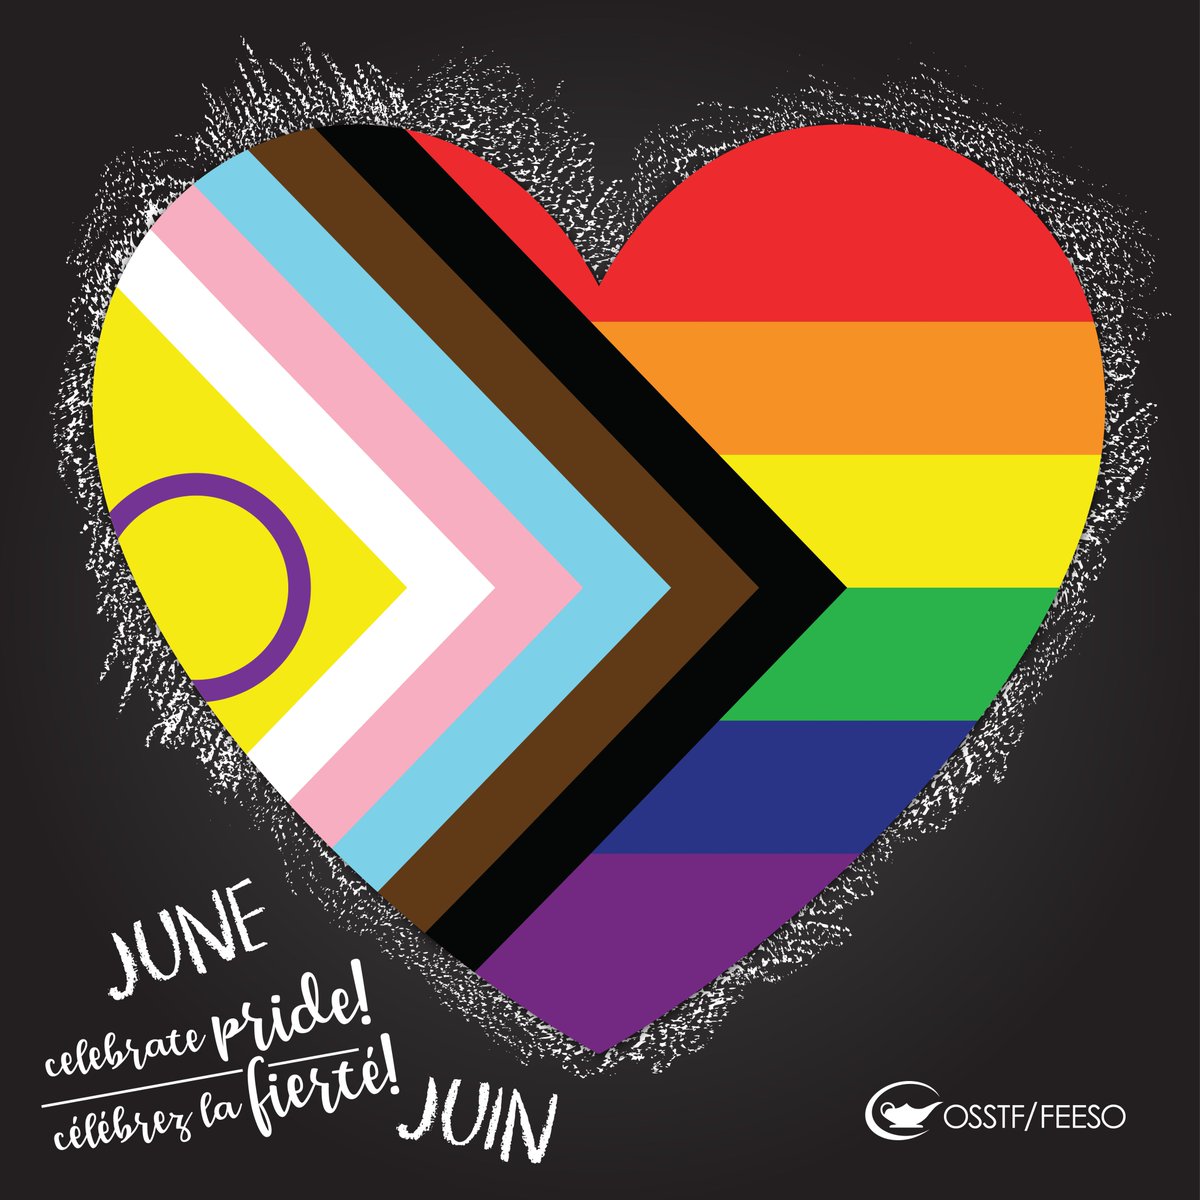 2SLGBTQIA+ people have a right to exist free from harm.
As Pride Months kicks off, support local #Pride2023 events like Palmerston's Pride in the Park, CW's Renegade Rainbows, Celebrate Your Awesome in #Orangeville, and #GuelphPride.  #PrideMonth 🏳️‍🌈🏳️‍⚧️